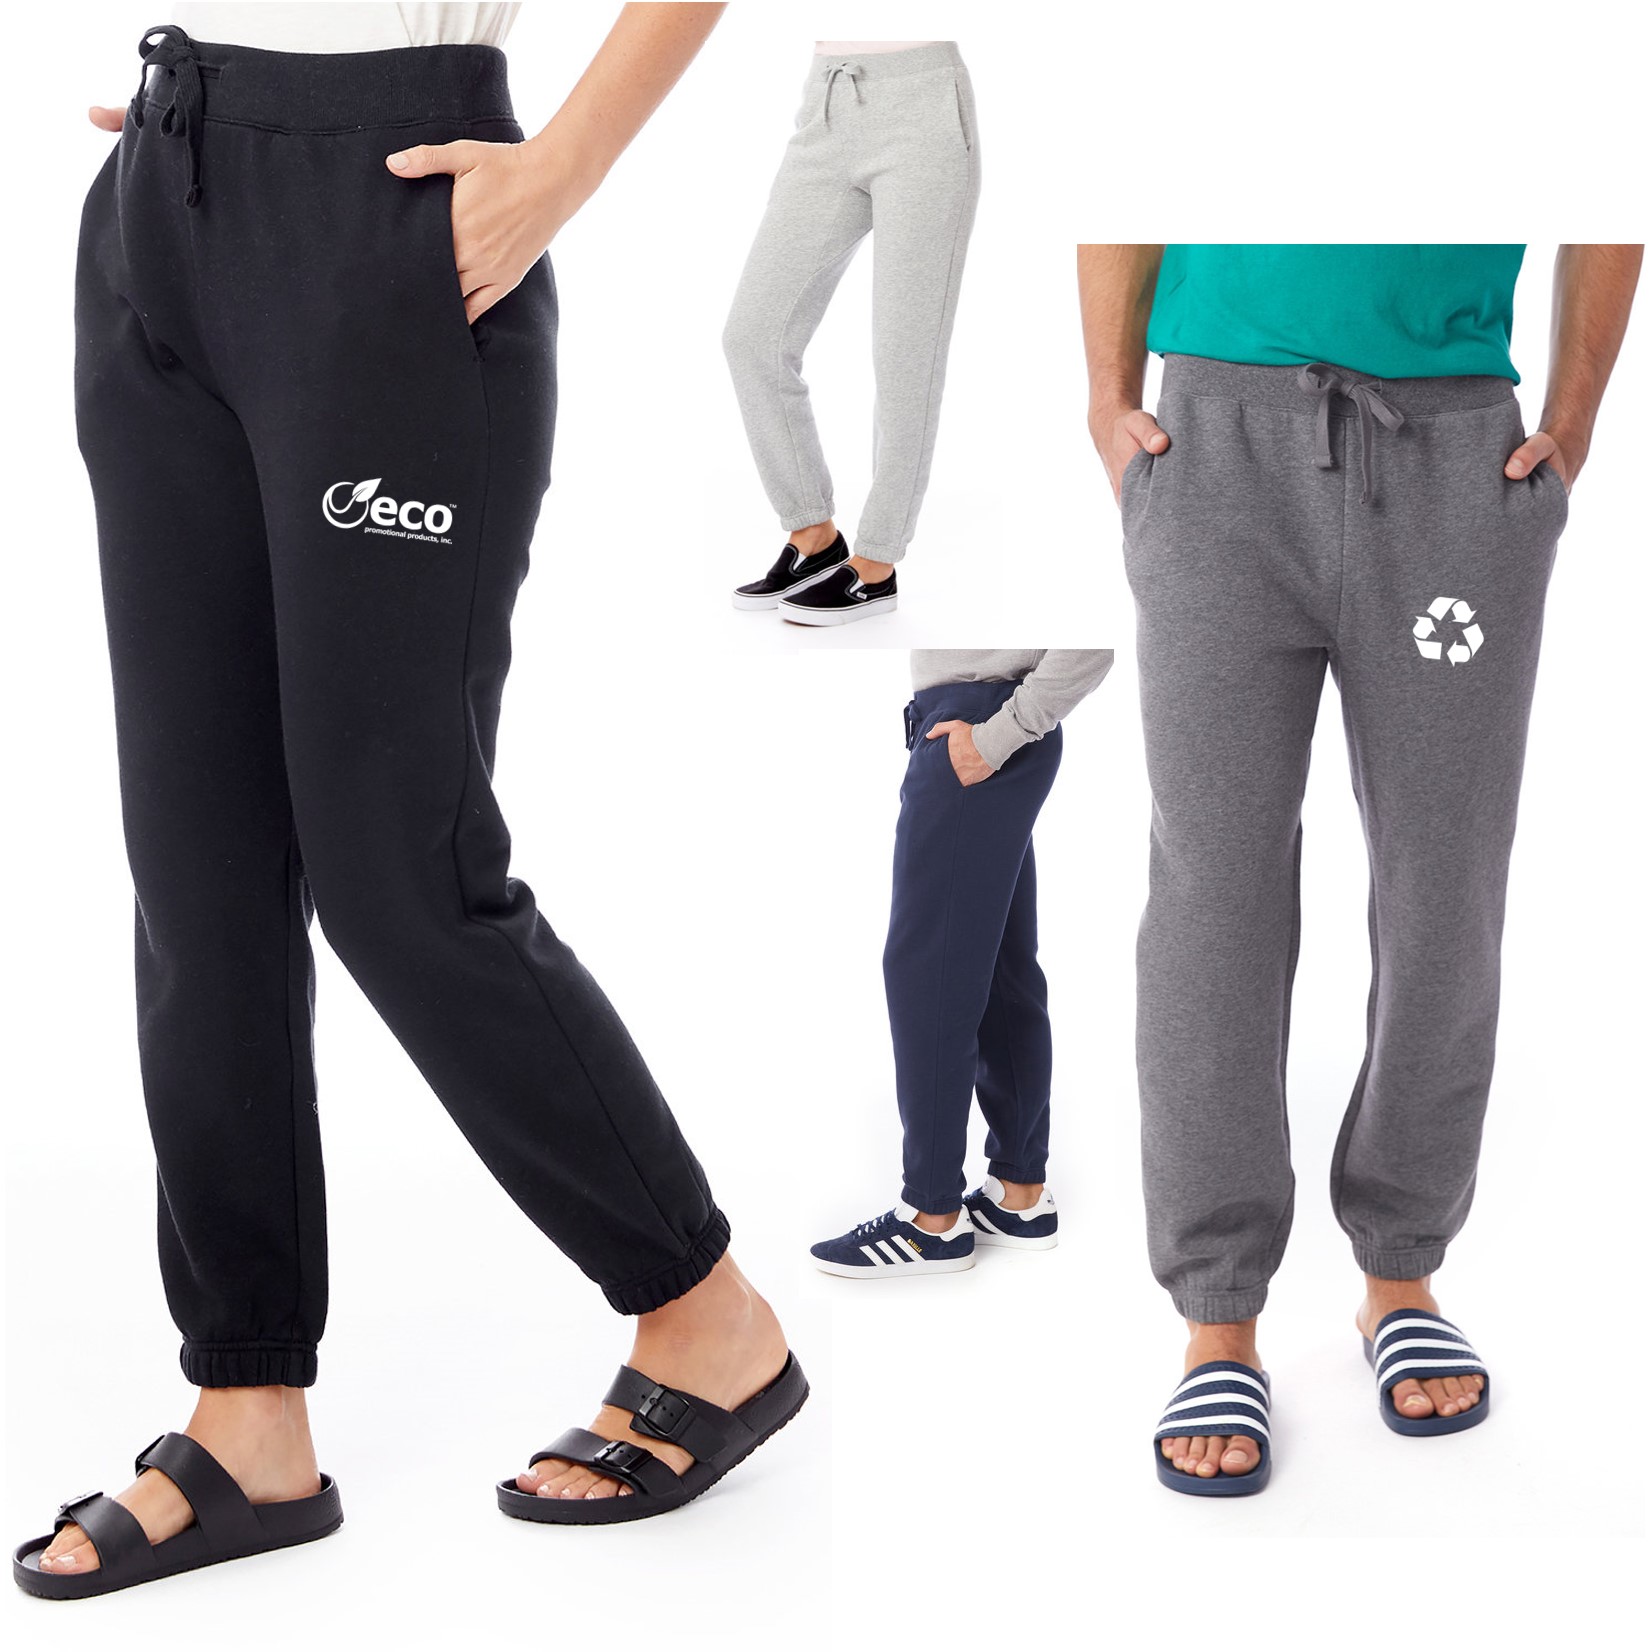  jogger sweatpants worn by a model in four color variants